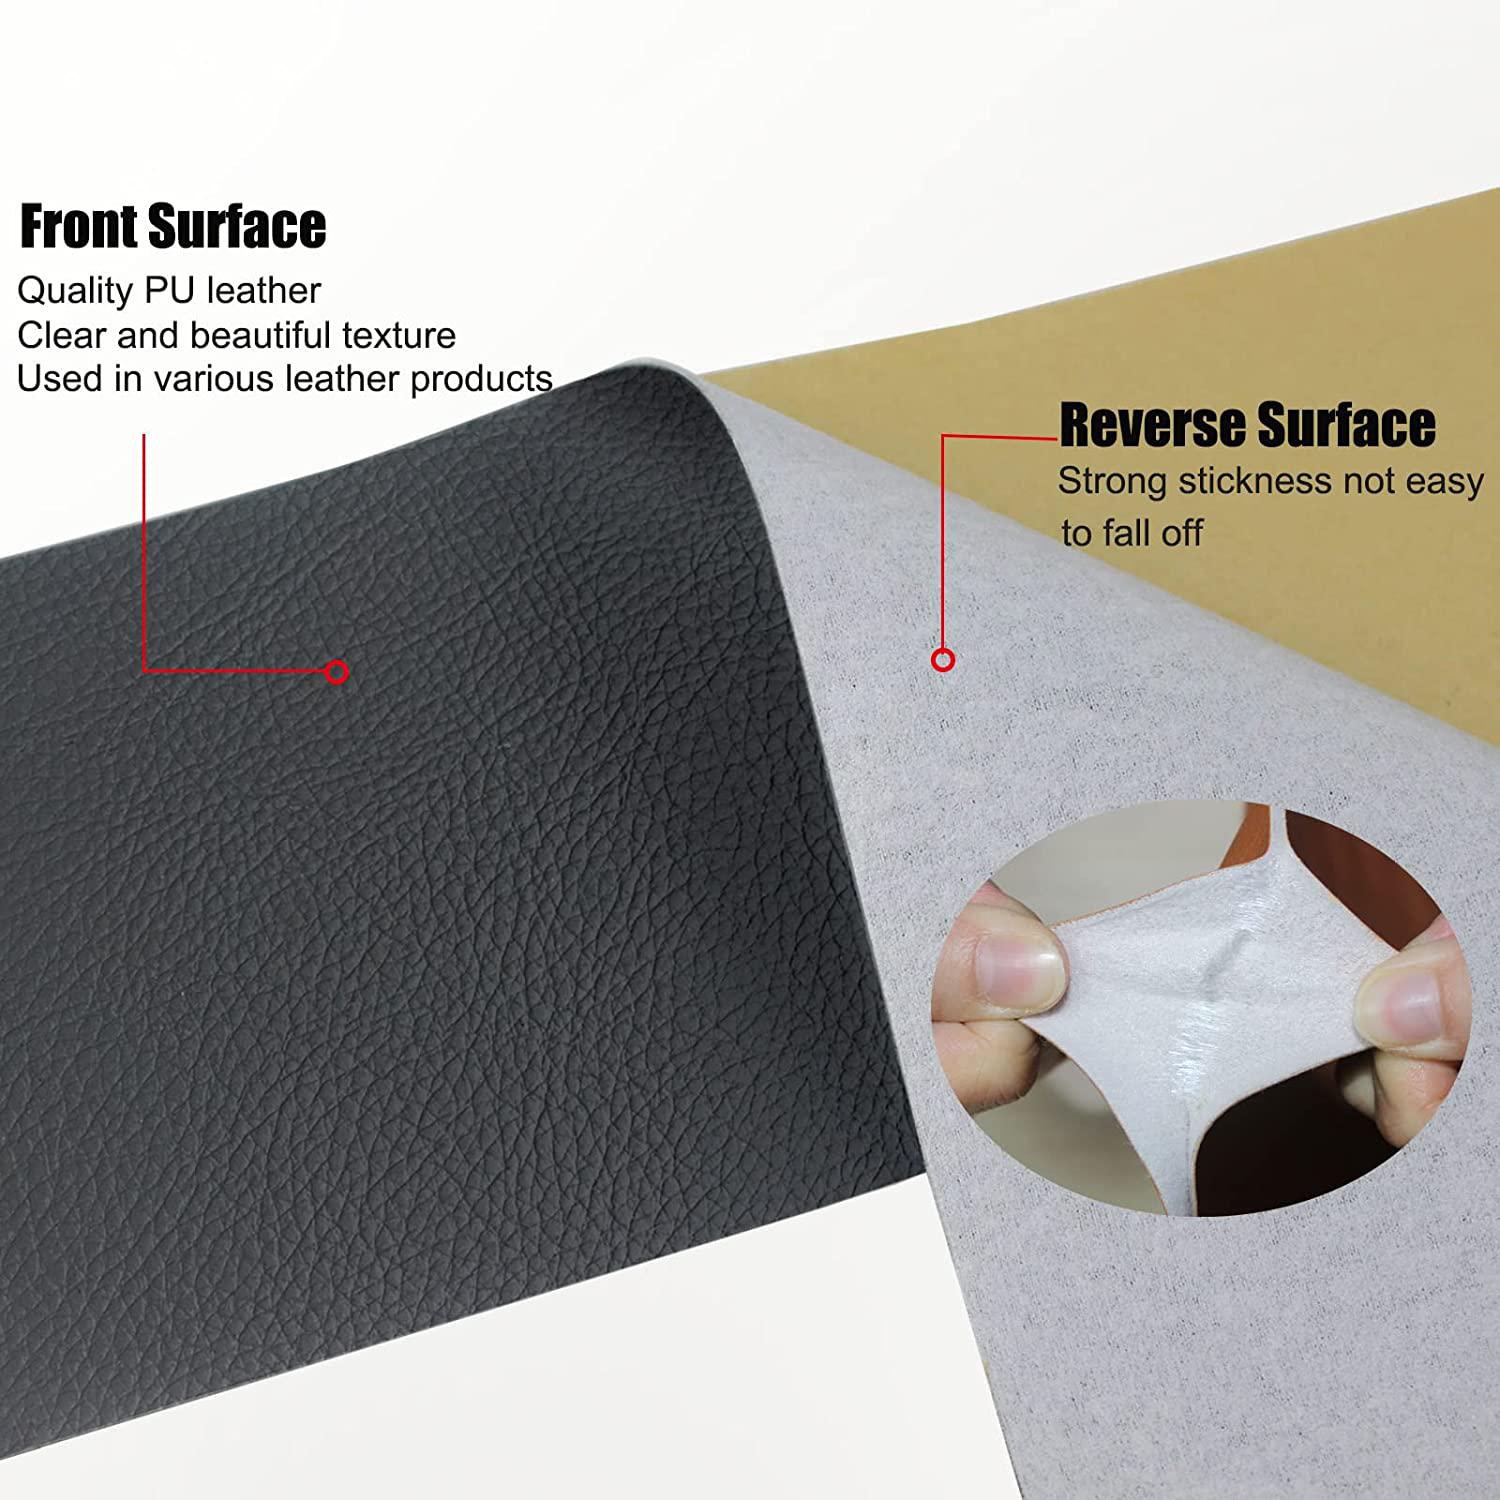 Bran Leather Patch Kit Auto-adhesive Leather Patchs, Superior Quality  Auto-adhesive Leather Repair Patch, For Sofa Sofa Cracks, Burns, Auto Seat  Acces